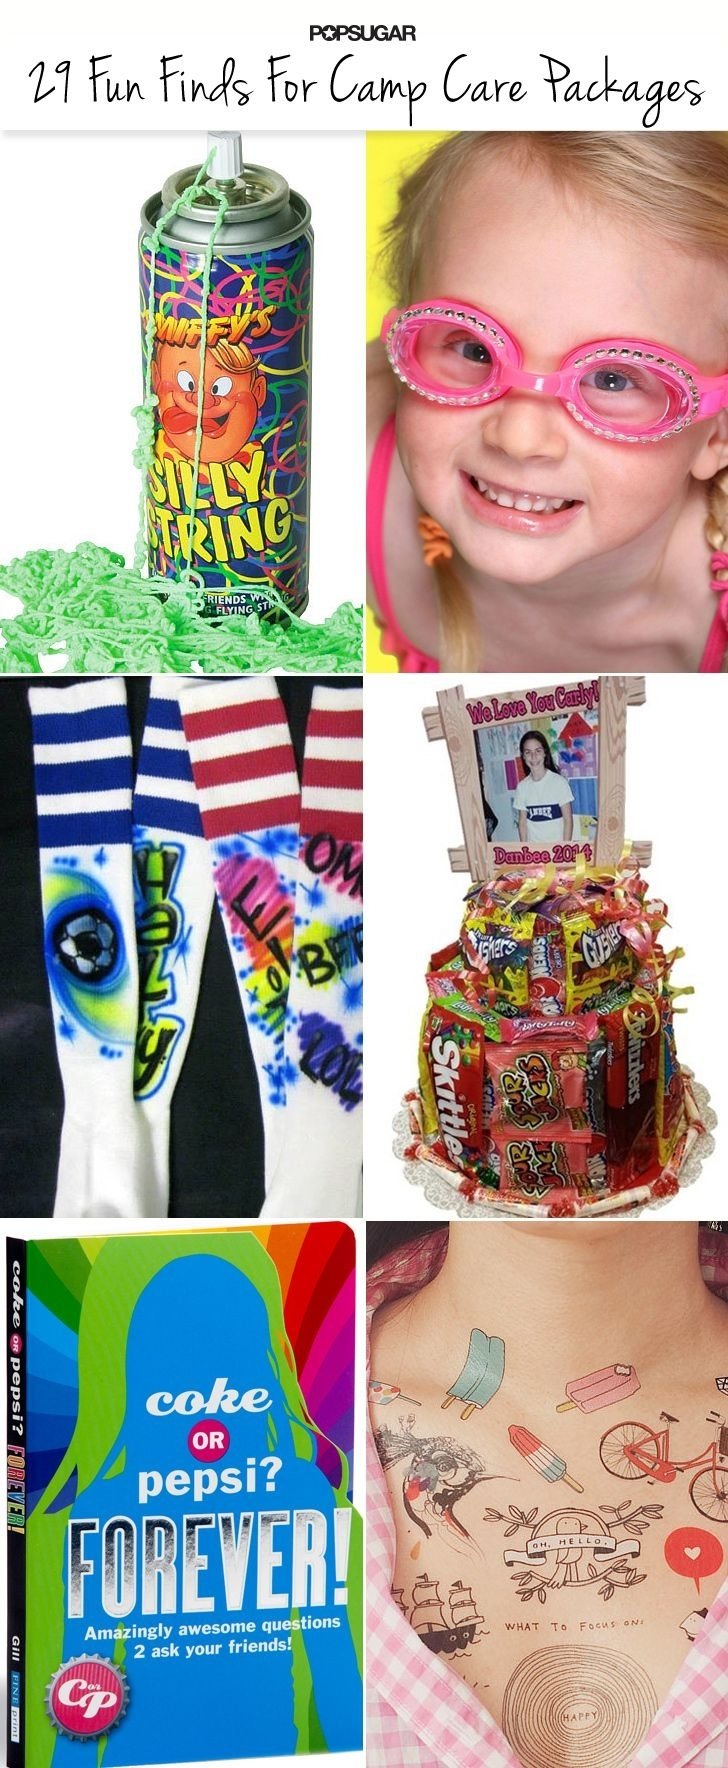 10 Lovely Summer Camp Care Package Ideas 66 best summer camp care packages images on pinterest birthdays 2022